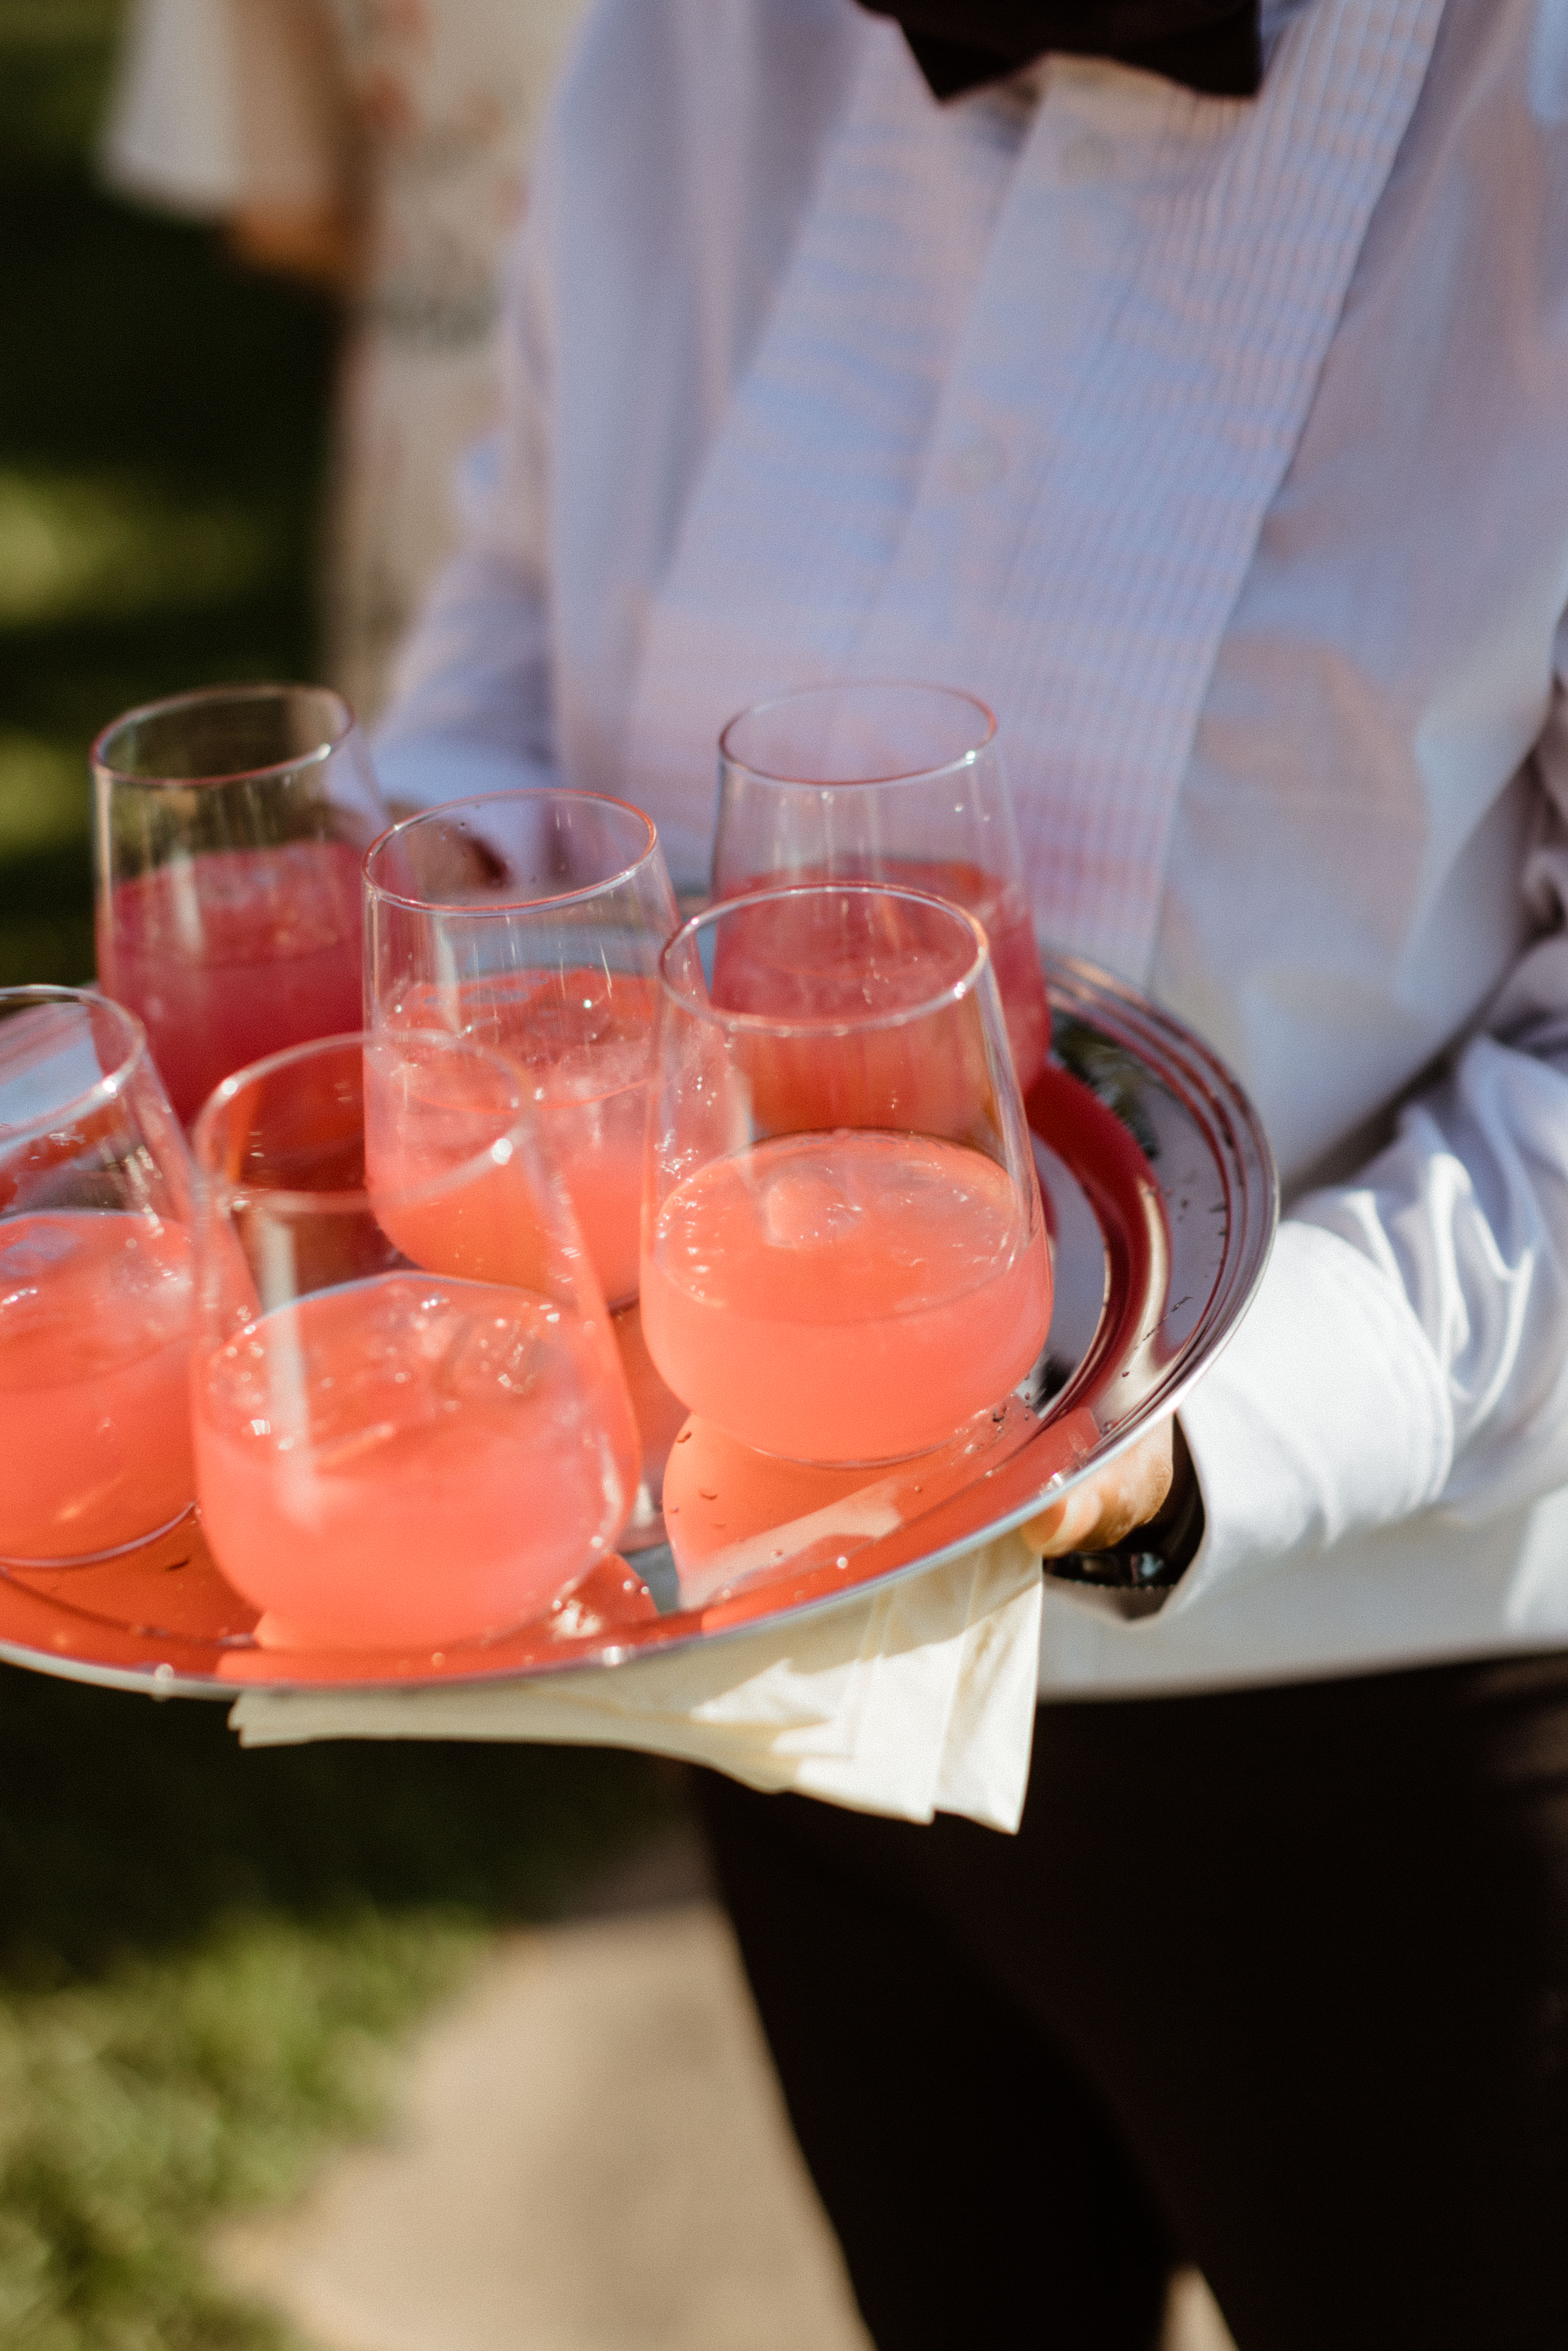 Waiter brings a fresh tray of cocktails out during the cocktail hour